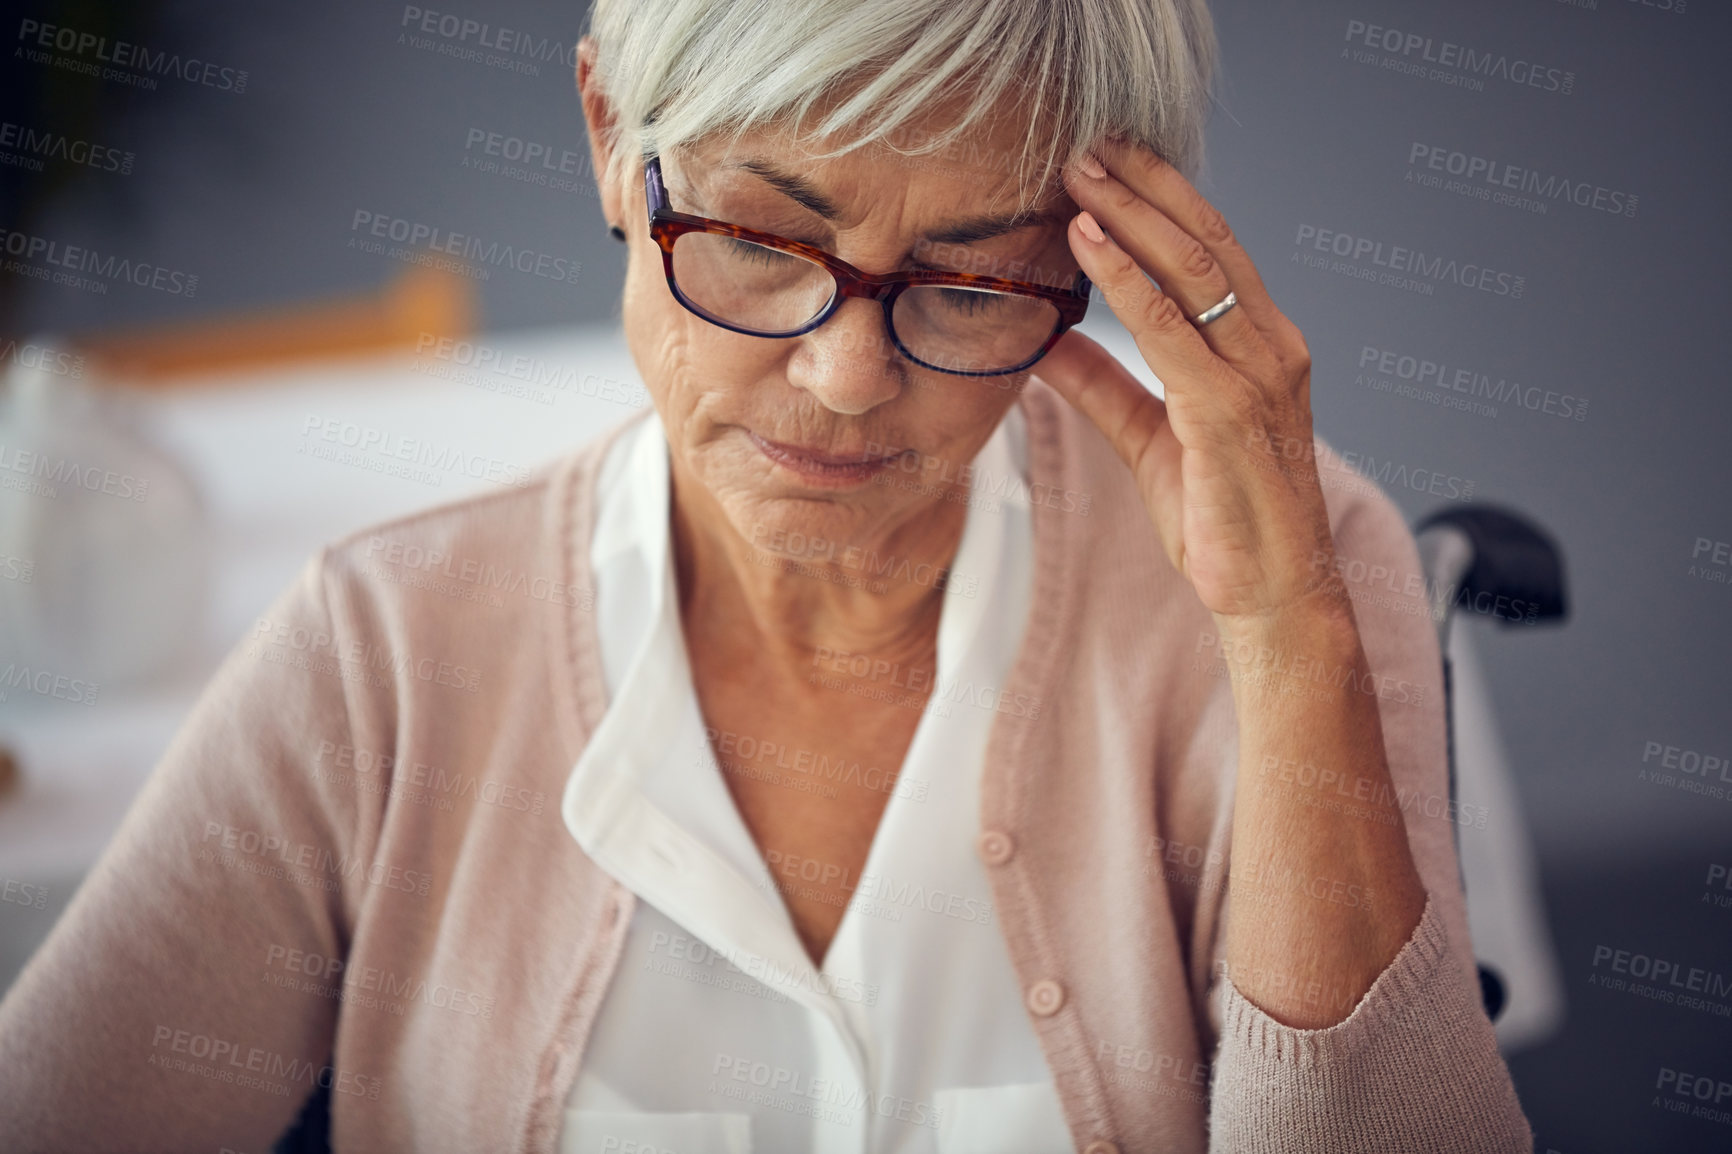 Buy stock photo Cropped shot of a senior woman suffering with a headache while sitting in her wheelchair in a retirement home